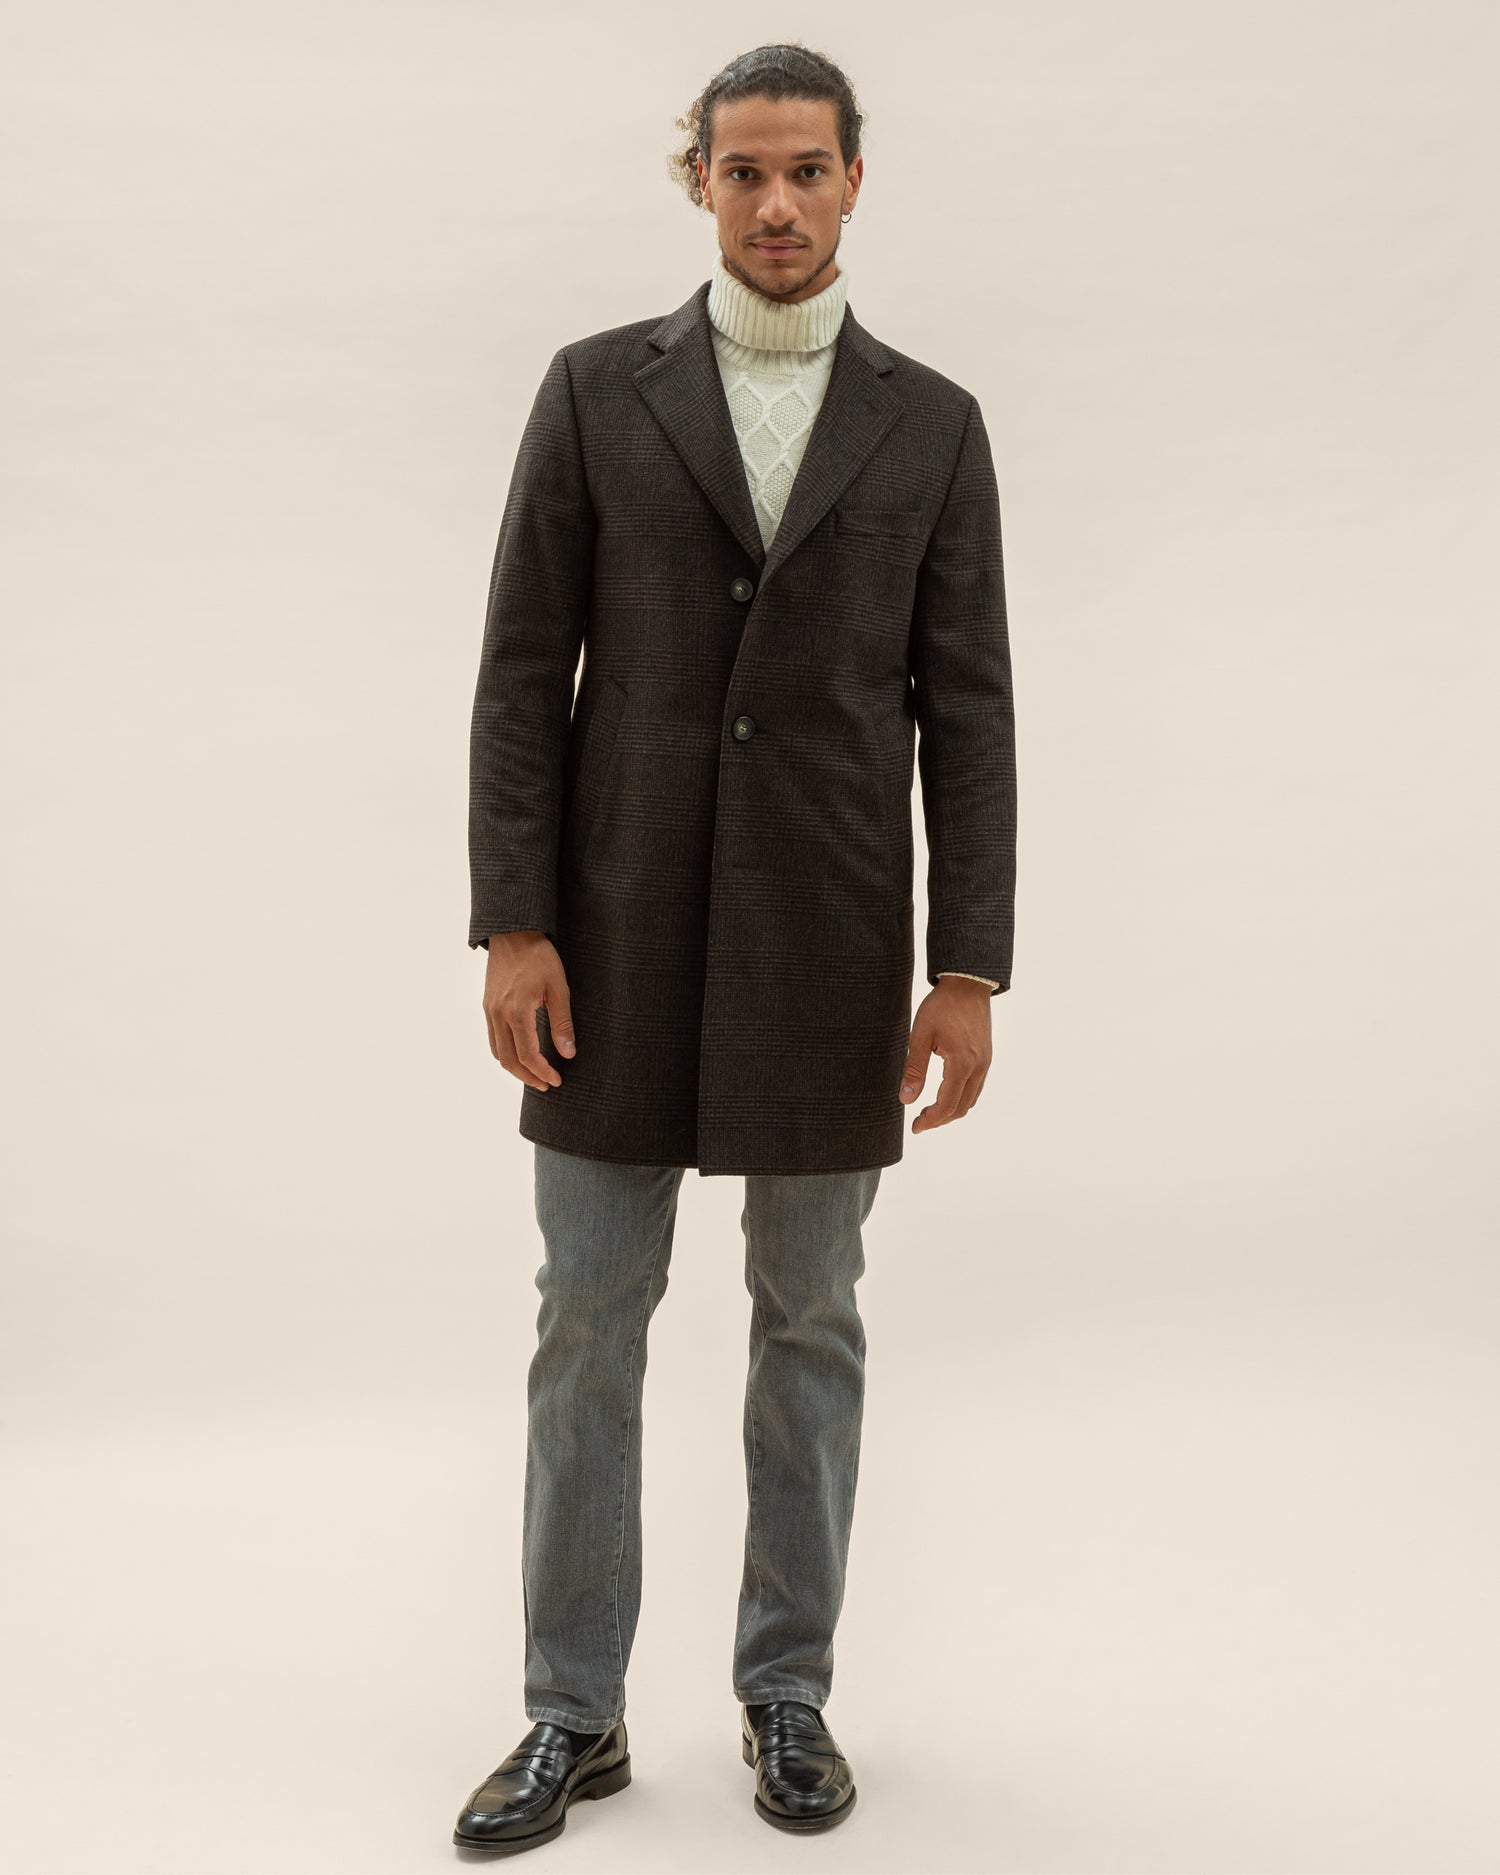 Slim fit Overcoat in Brown Check Fortuny Wool-Cashmere Blend (8464784654666)